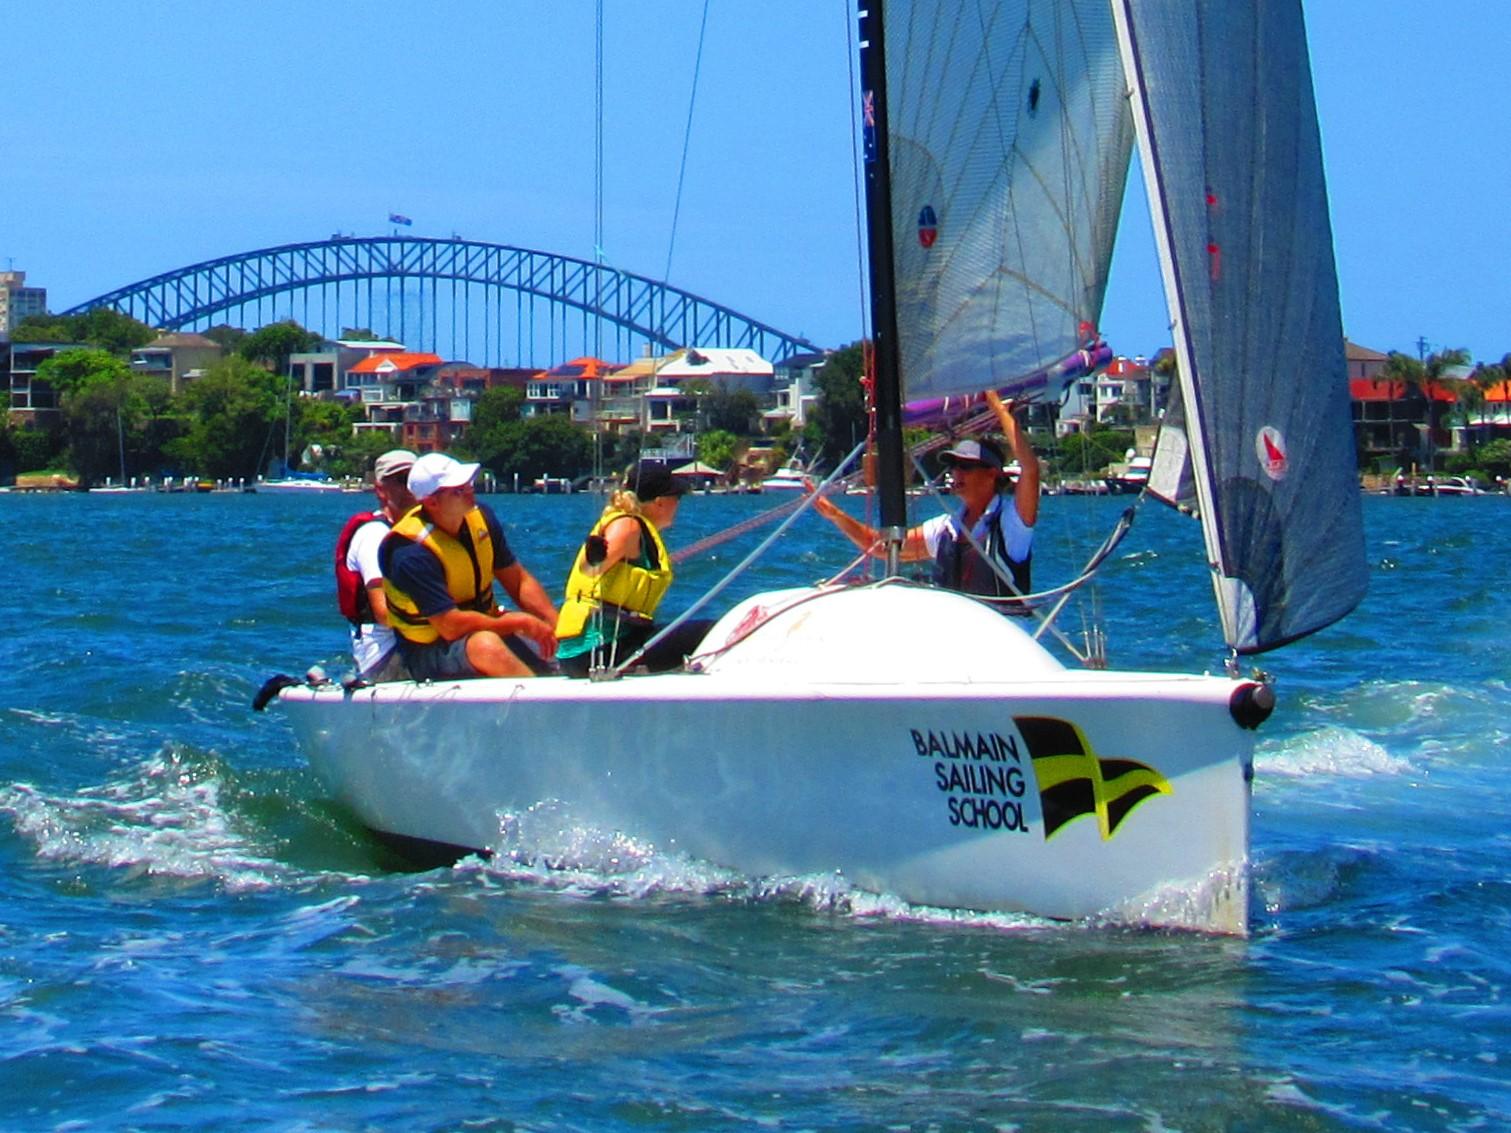 BSC Sailing School - Intro to Sail, Magic 25 Keelboat 15 & 22 February, 7 March 9am-1pm, 3 x 4hr classes